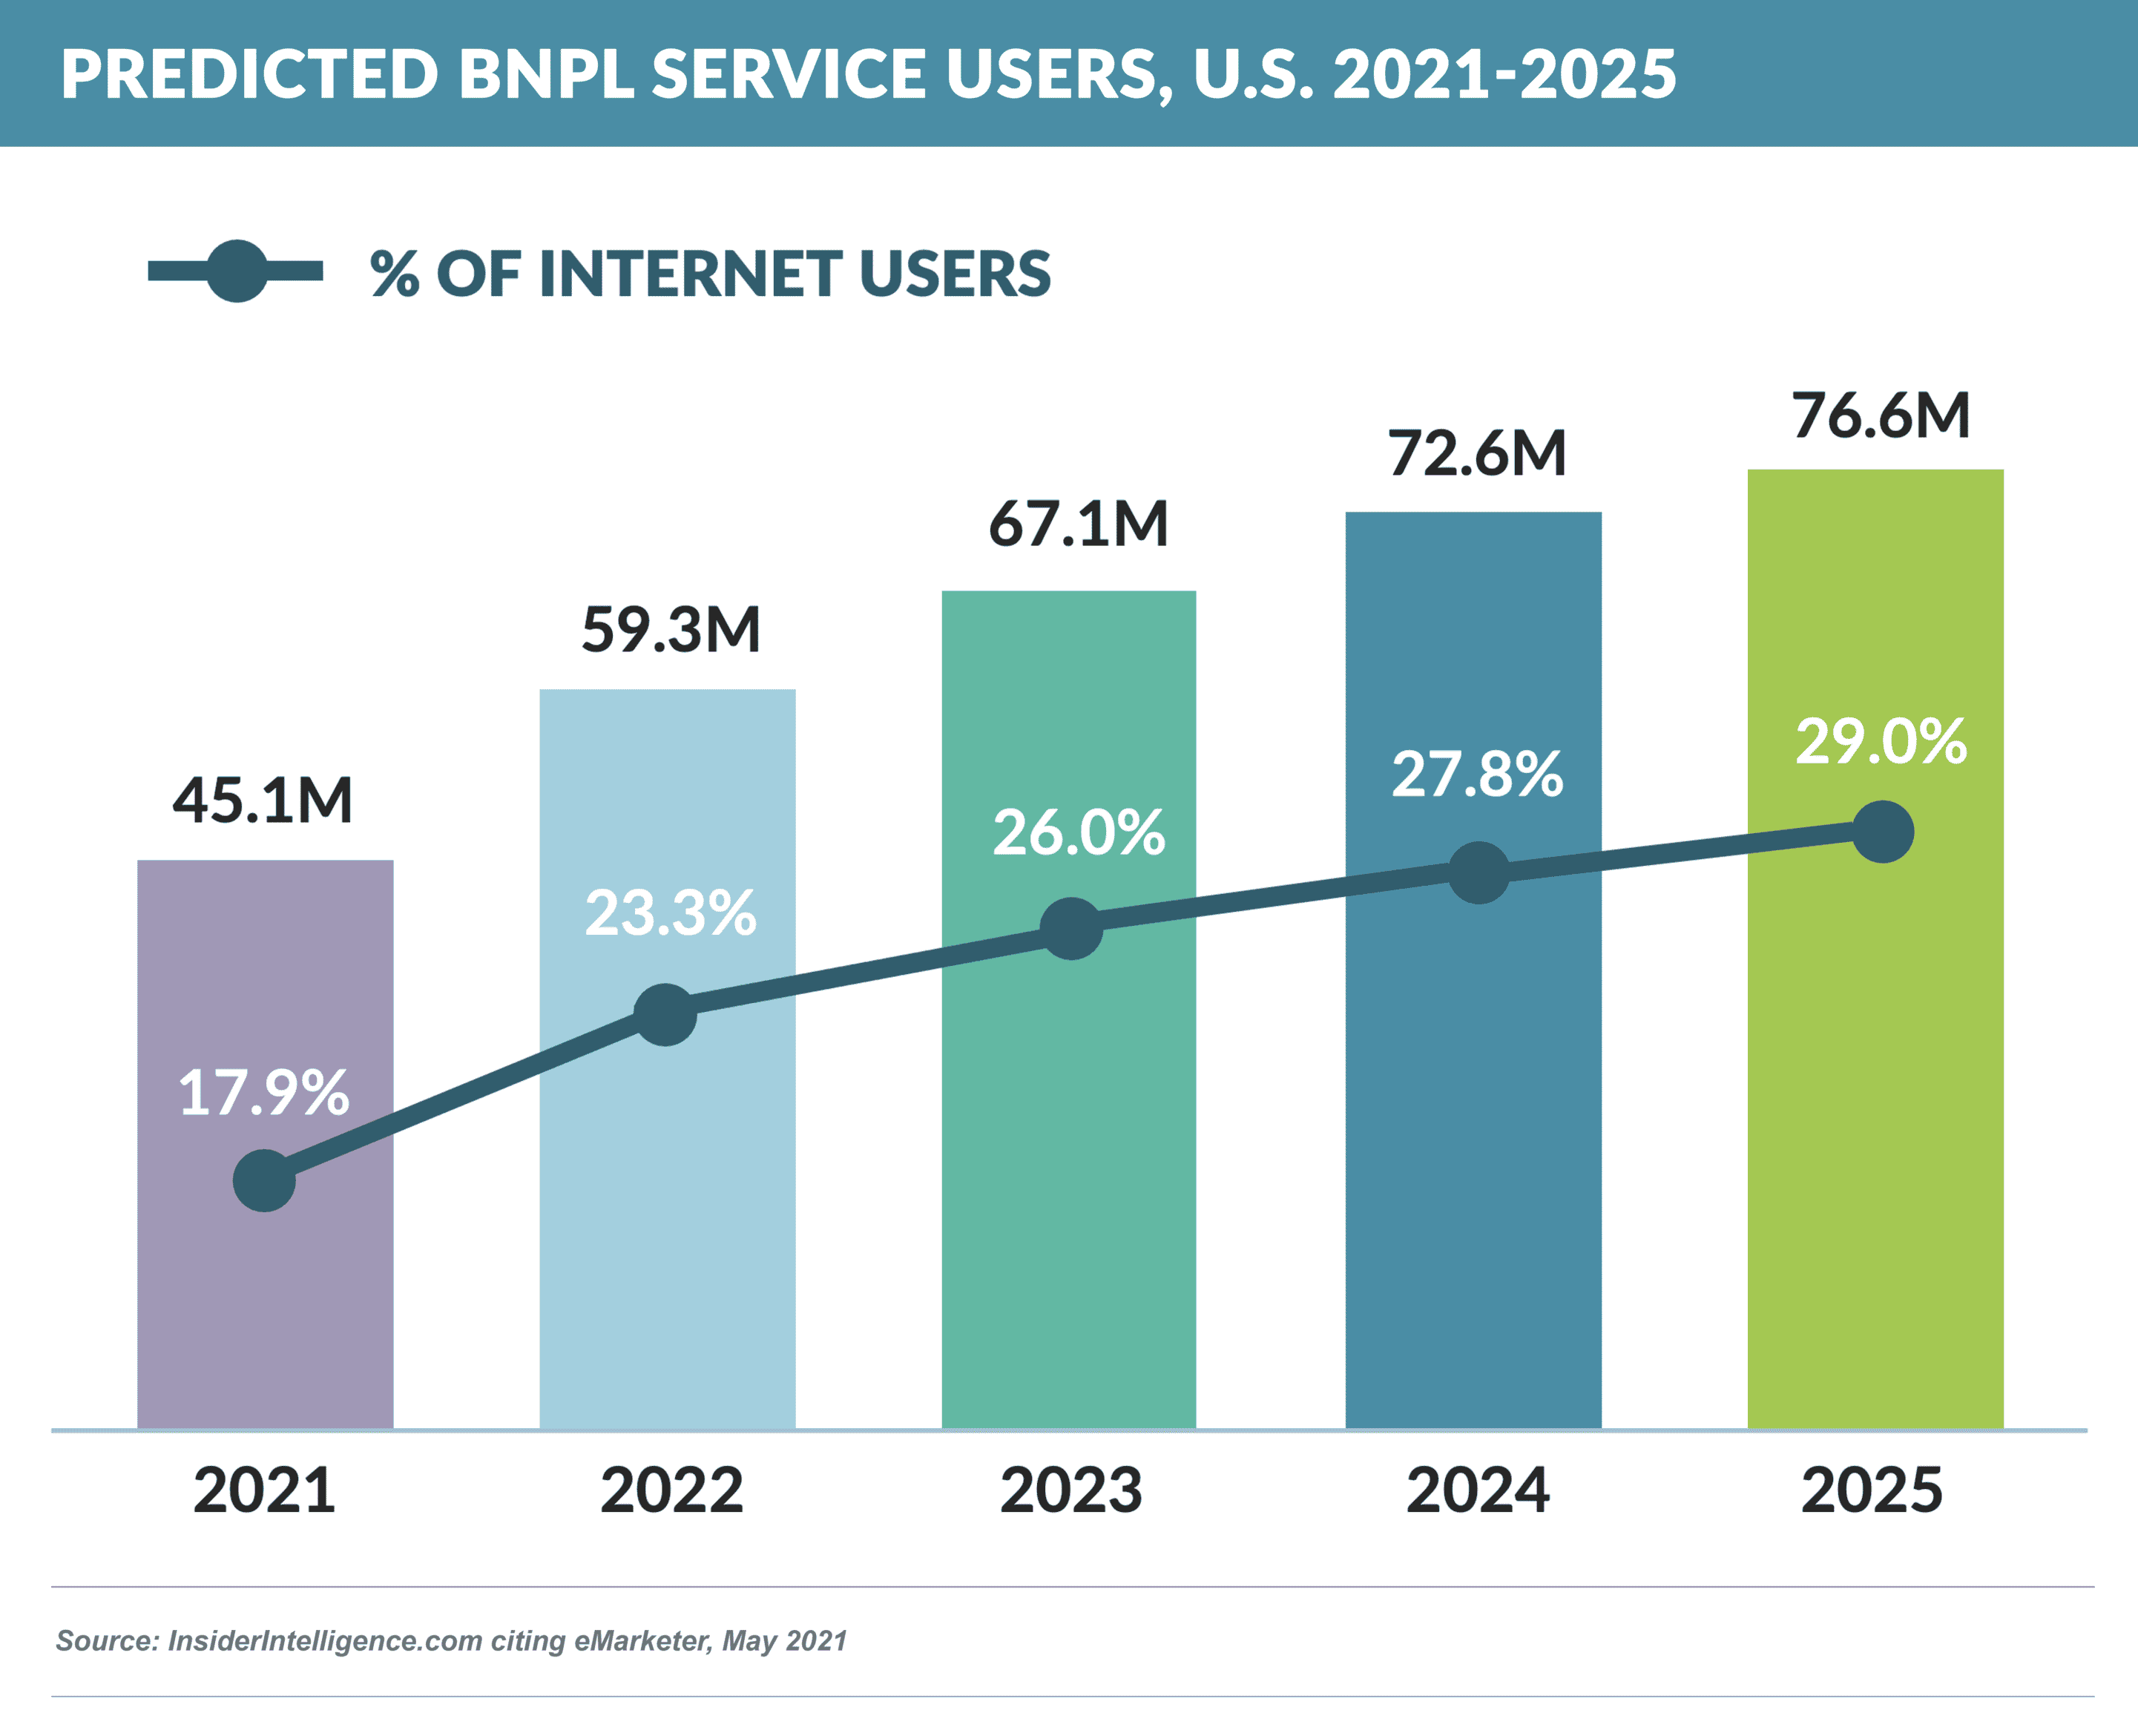 Predicted BNPL Service Users, 2021-2025